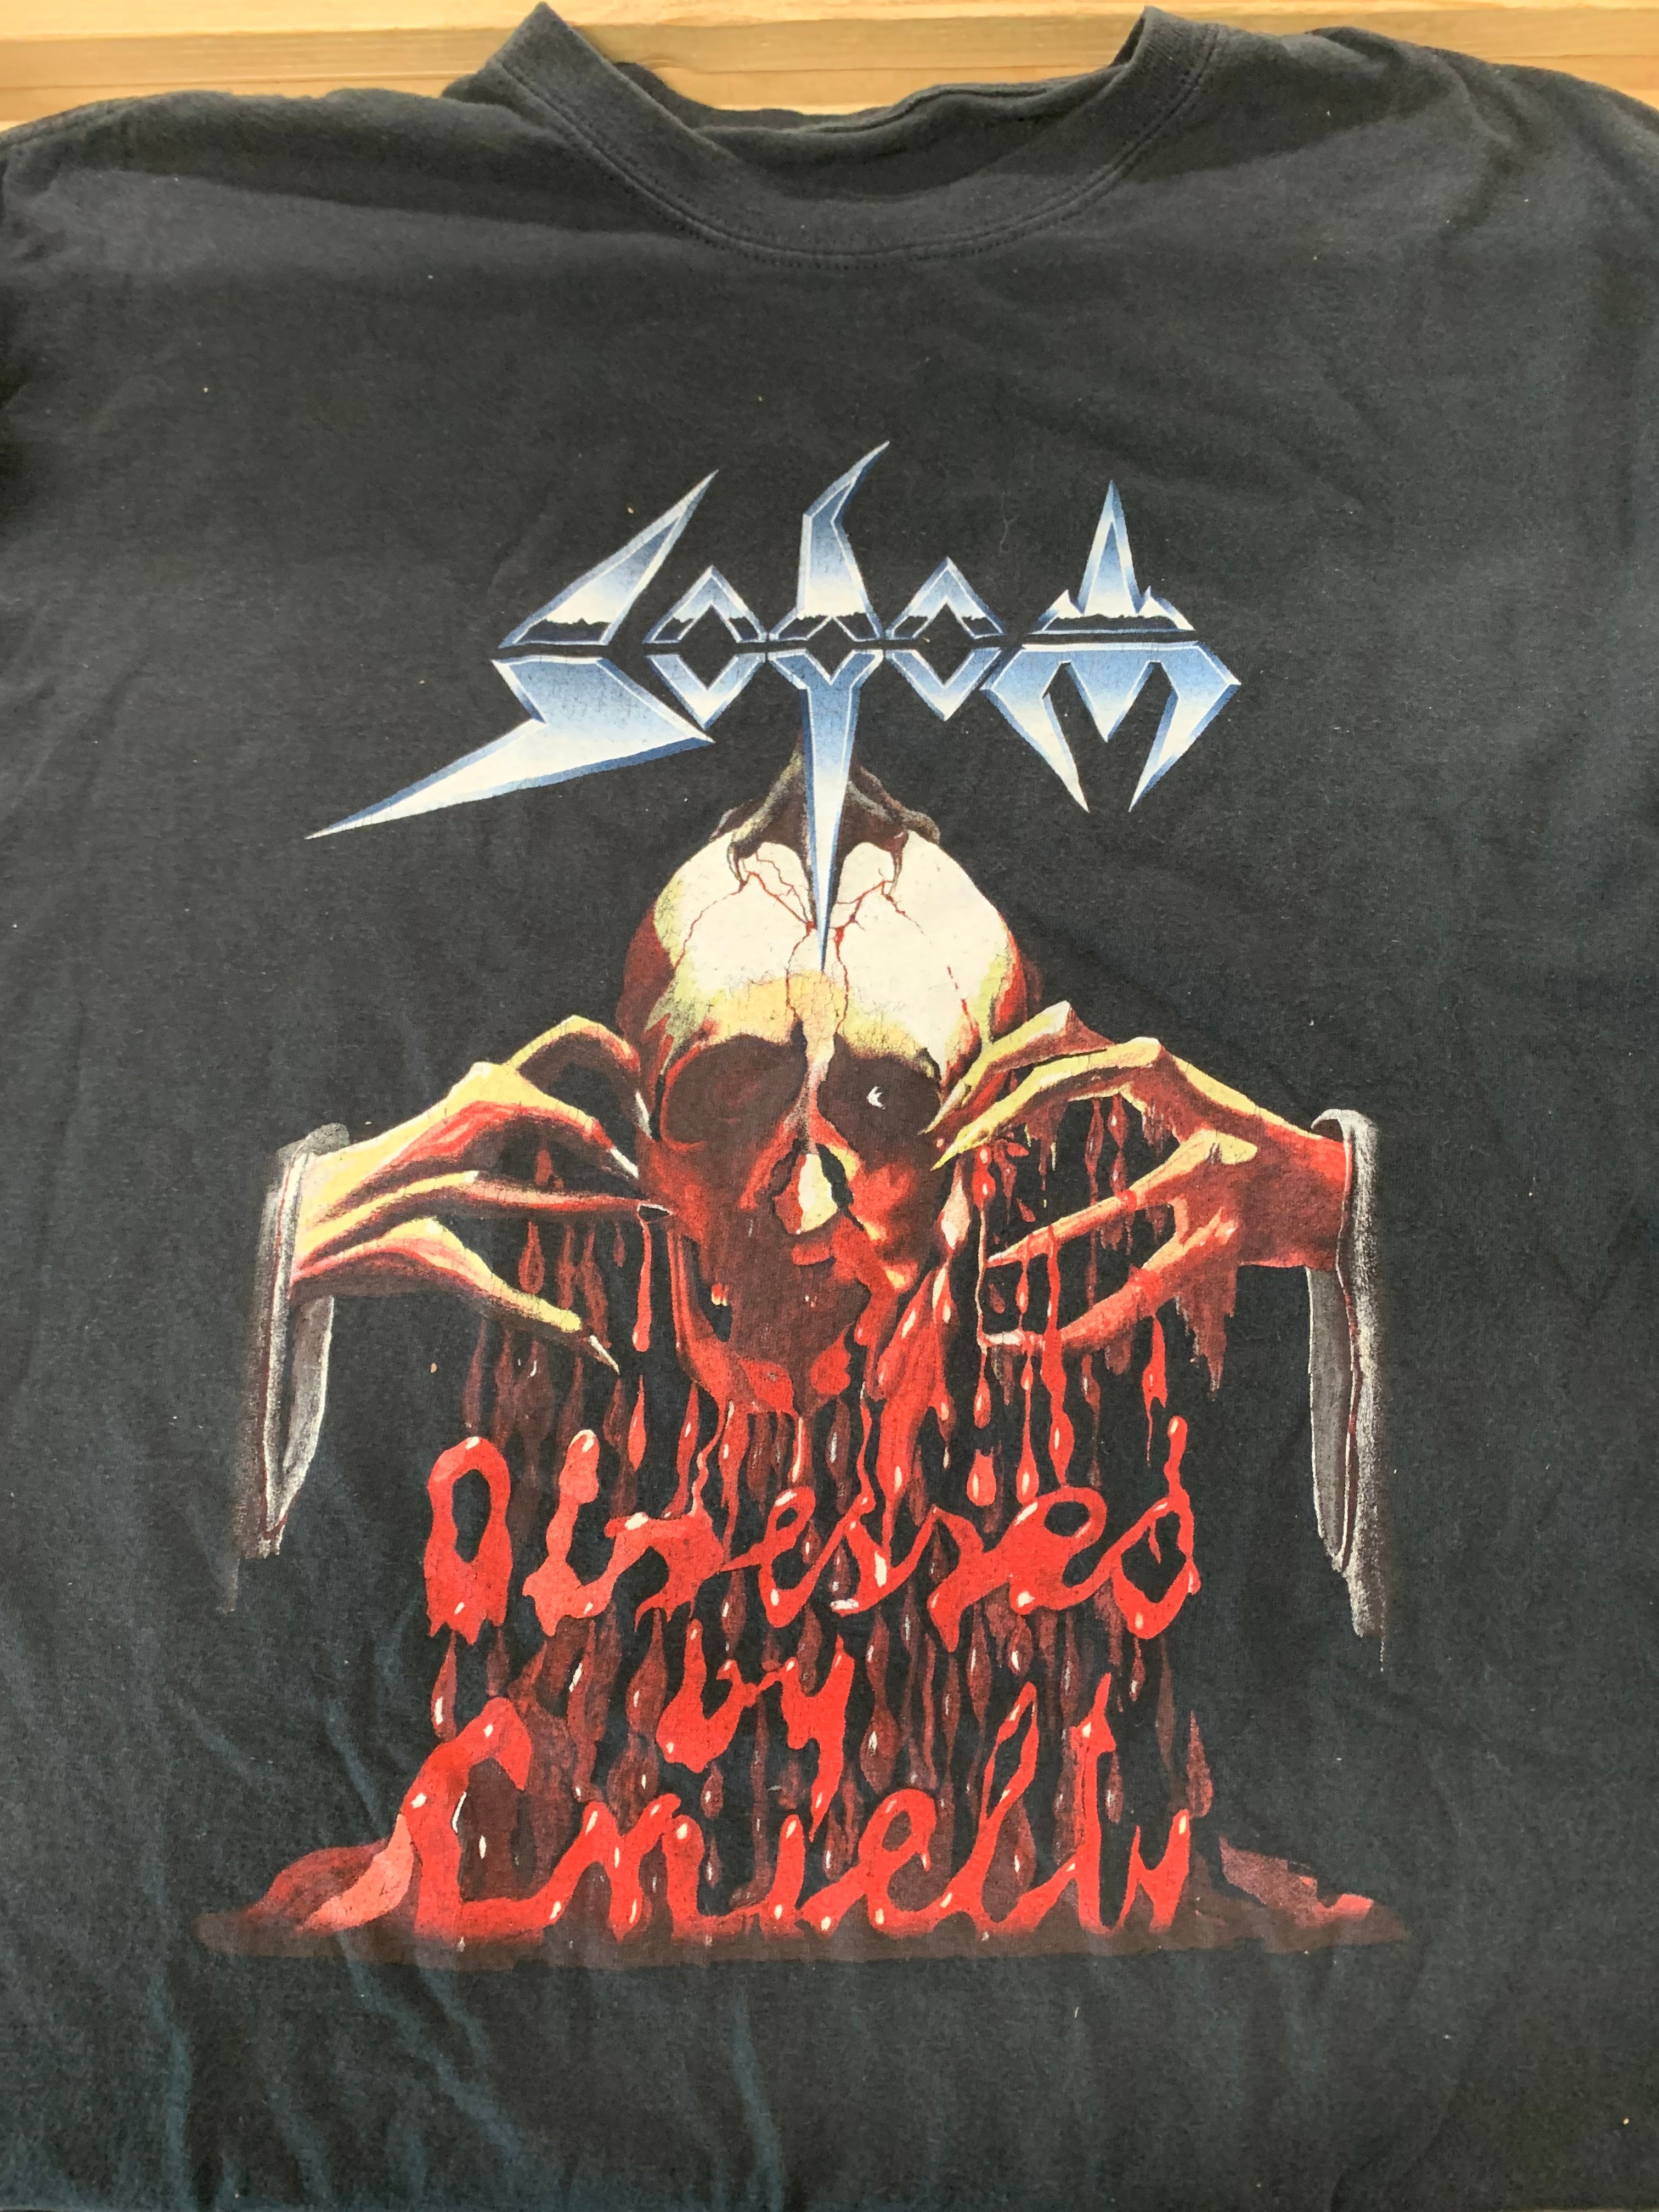 Sodom Obsessed By Cruelty T-Shirt, Black, XL